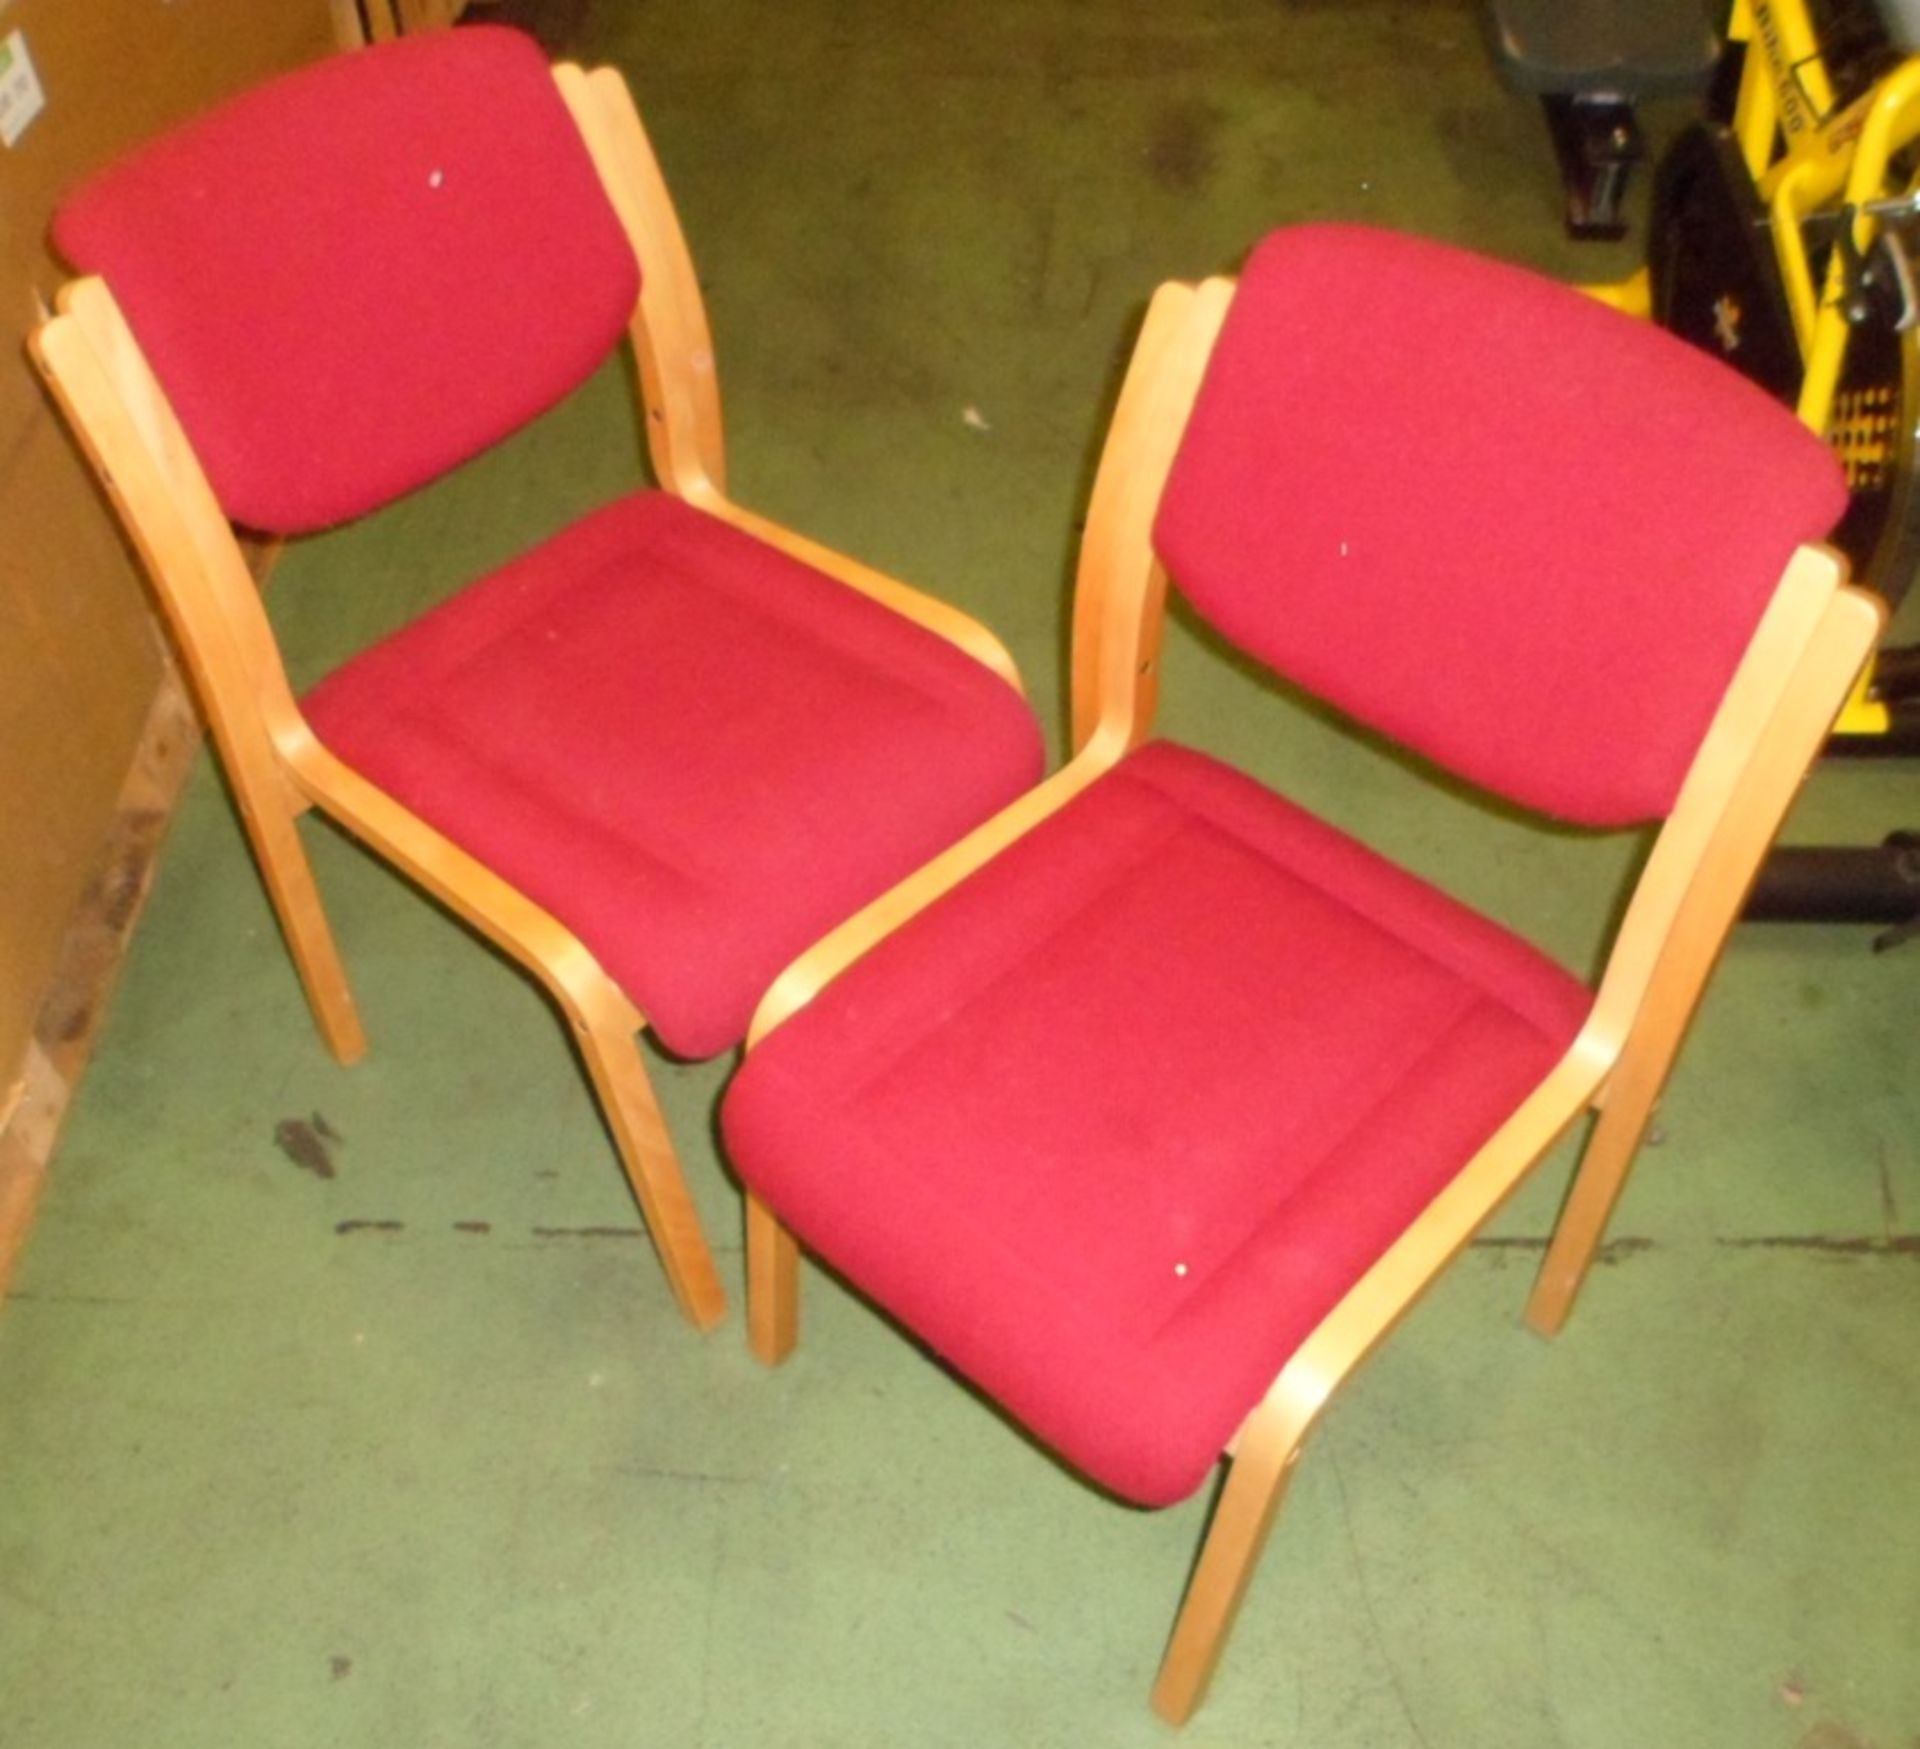 Padded fabric reception chairs - Image 2 of 2